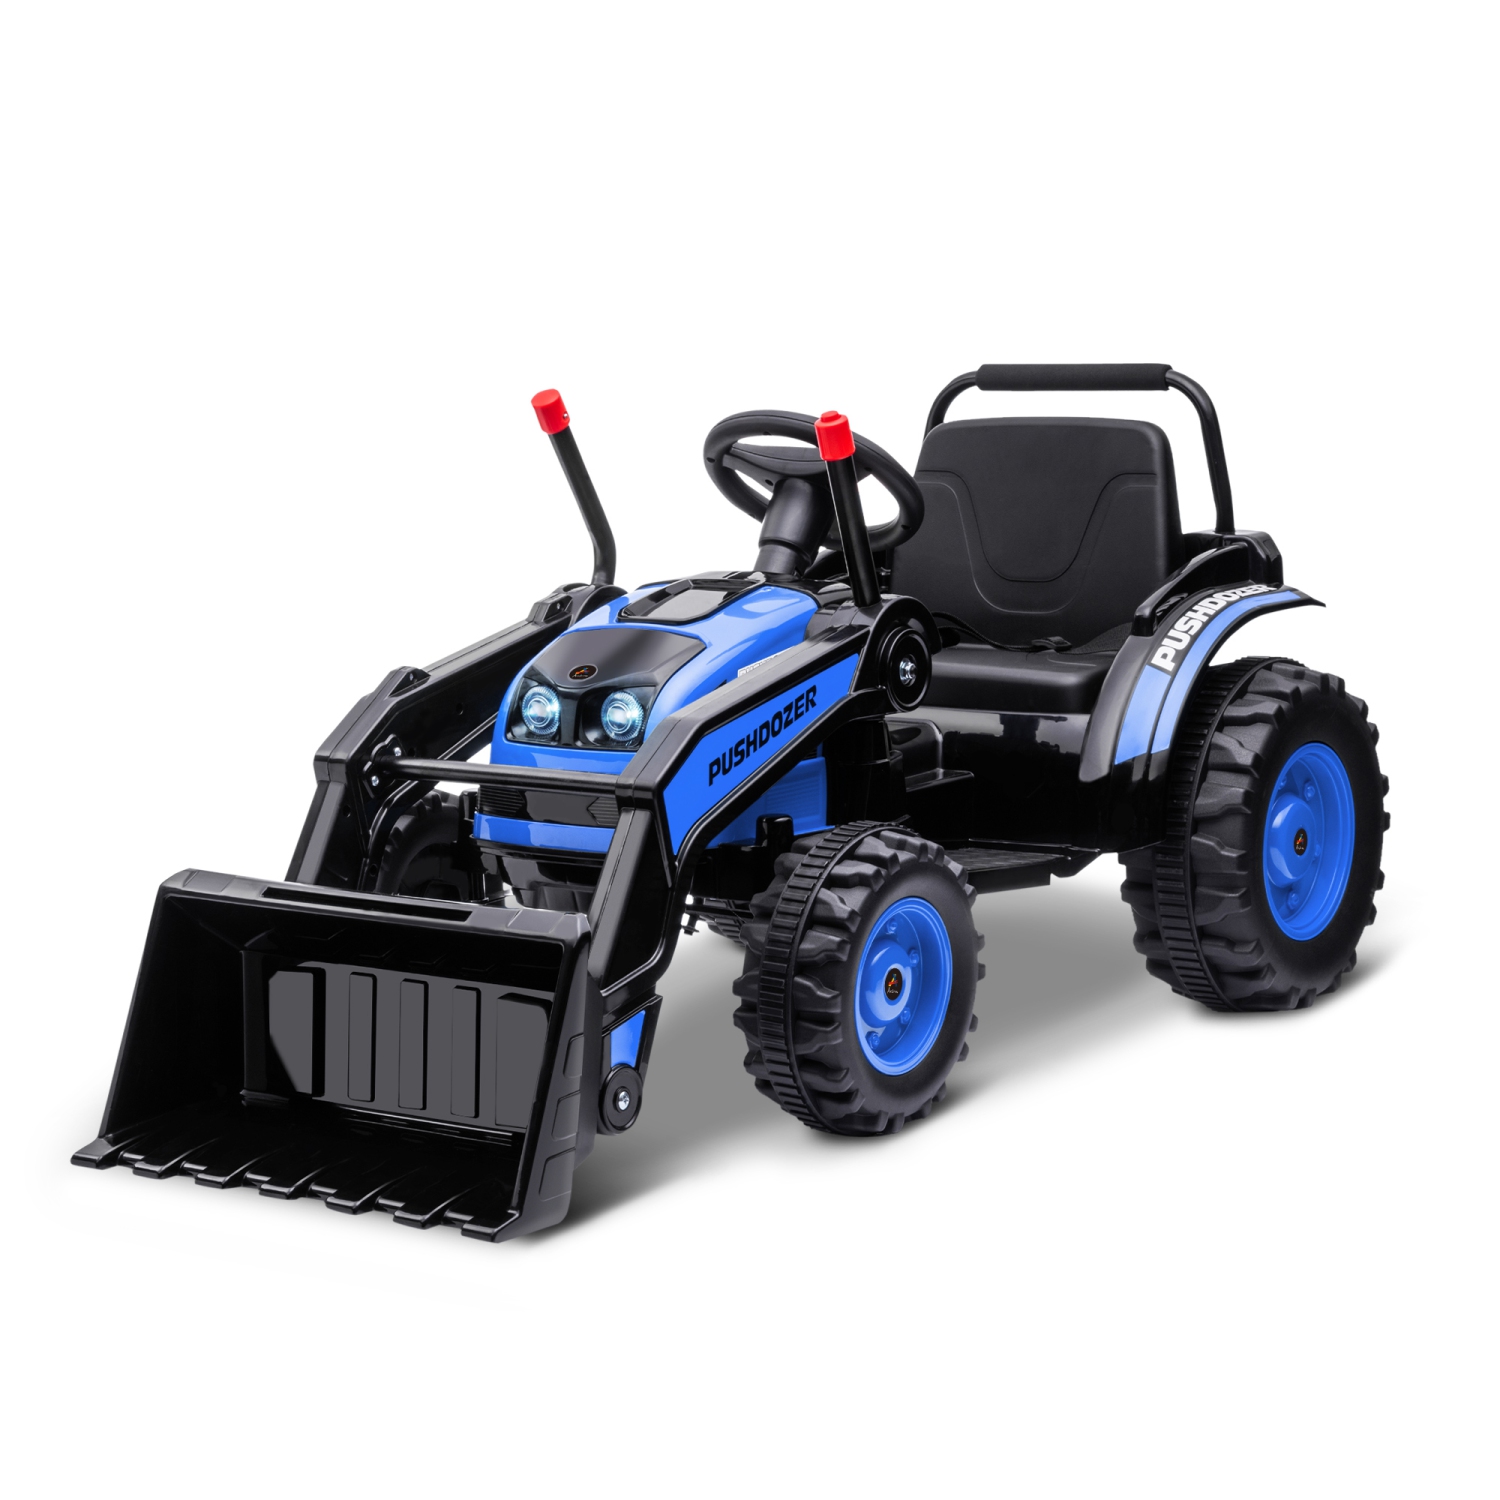 Aosom Kids Digger Ride On Excavator 6V Battery Powered Dual-Motor Construction Tractor Music Headlight Moving Forward Backward Gear for 3-5 years old Blue